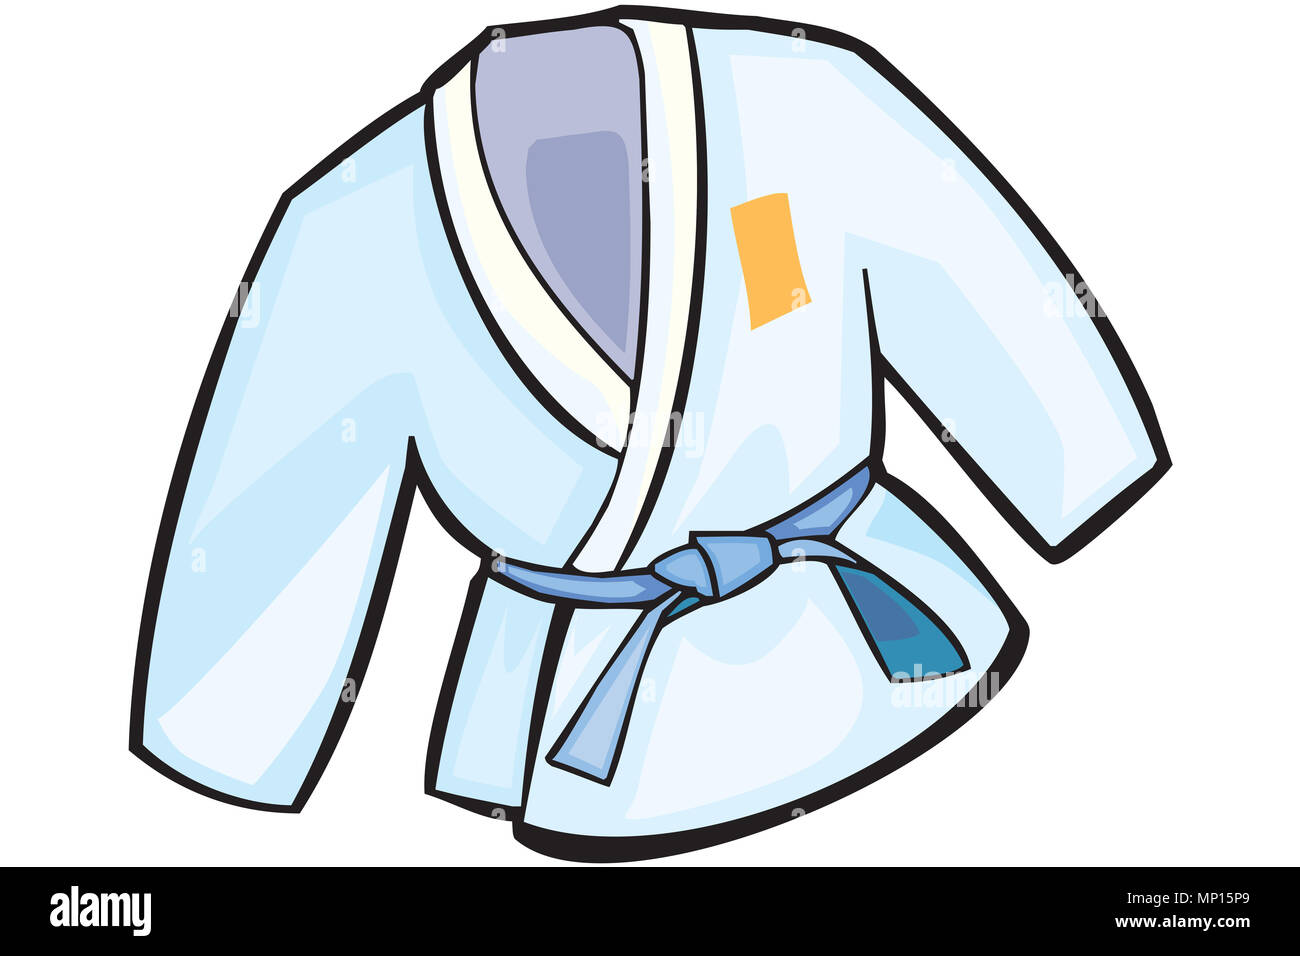 Illustrated image of a Karate dress Stock Photo - Alamy